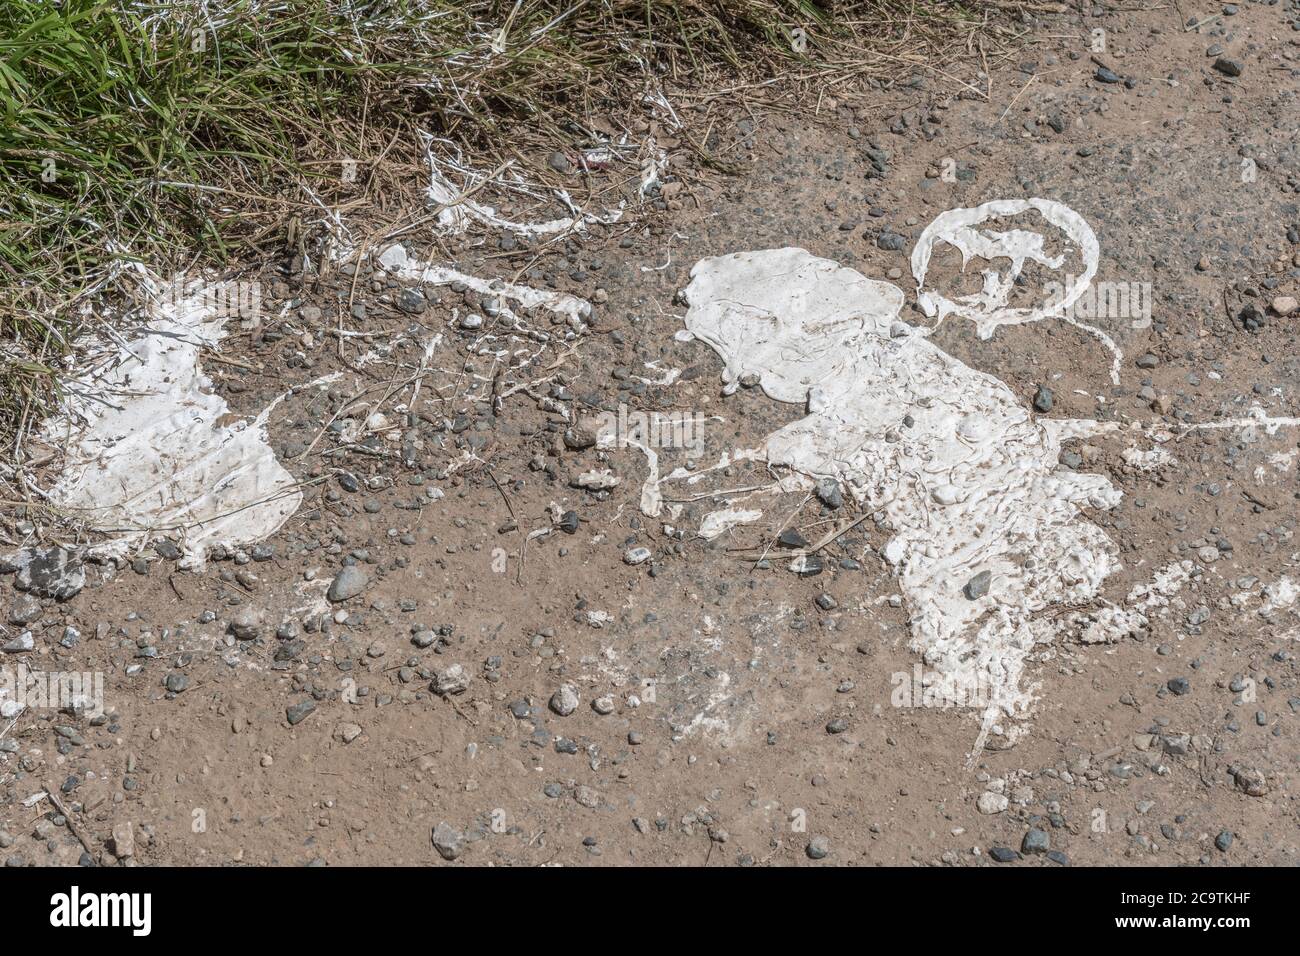 Abstract shapes of a thick white paint on rural road. Possibly road marking mastic. Old paint texture, abstract shapes, paint spillage. Oops! Stock Photo